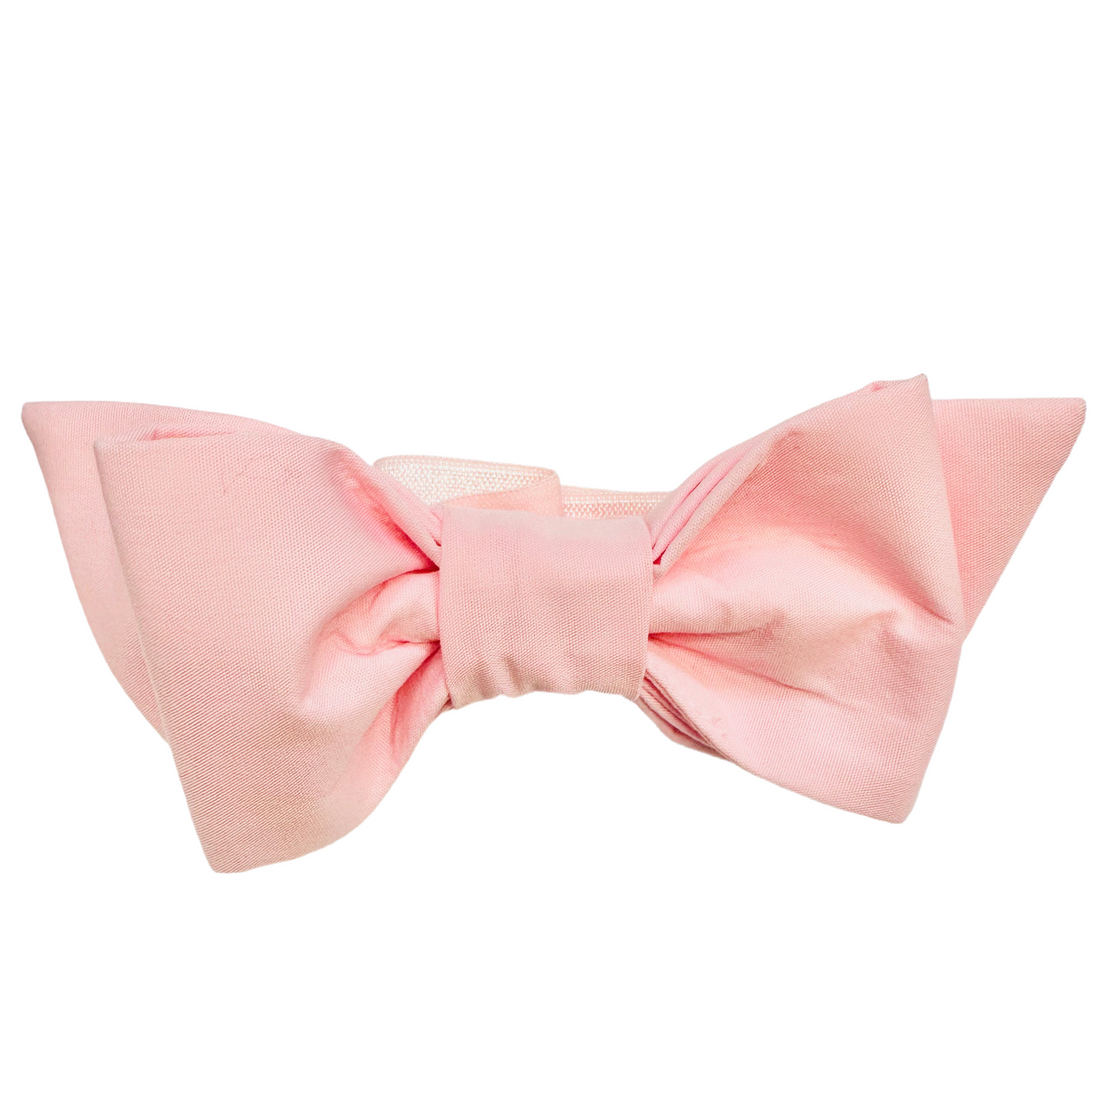 The Bow Next Door Betsy Baby Hairbow-Ballet Pink